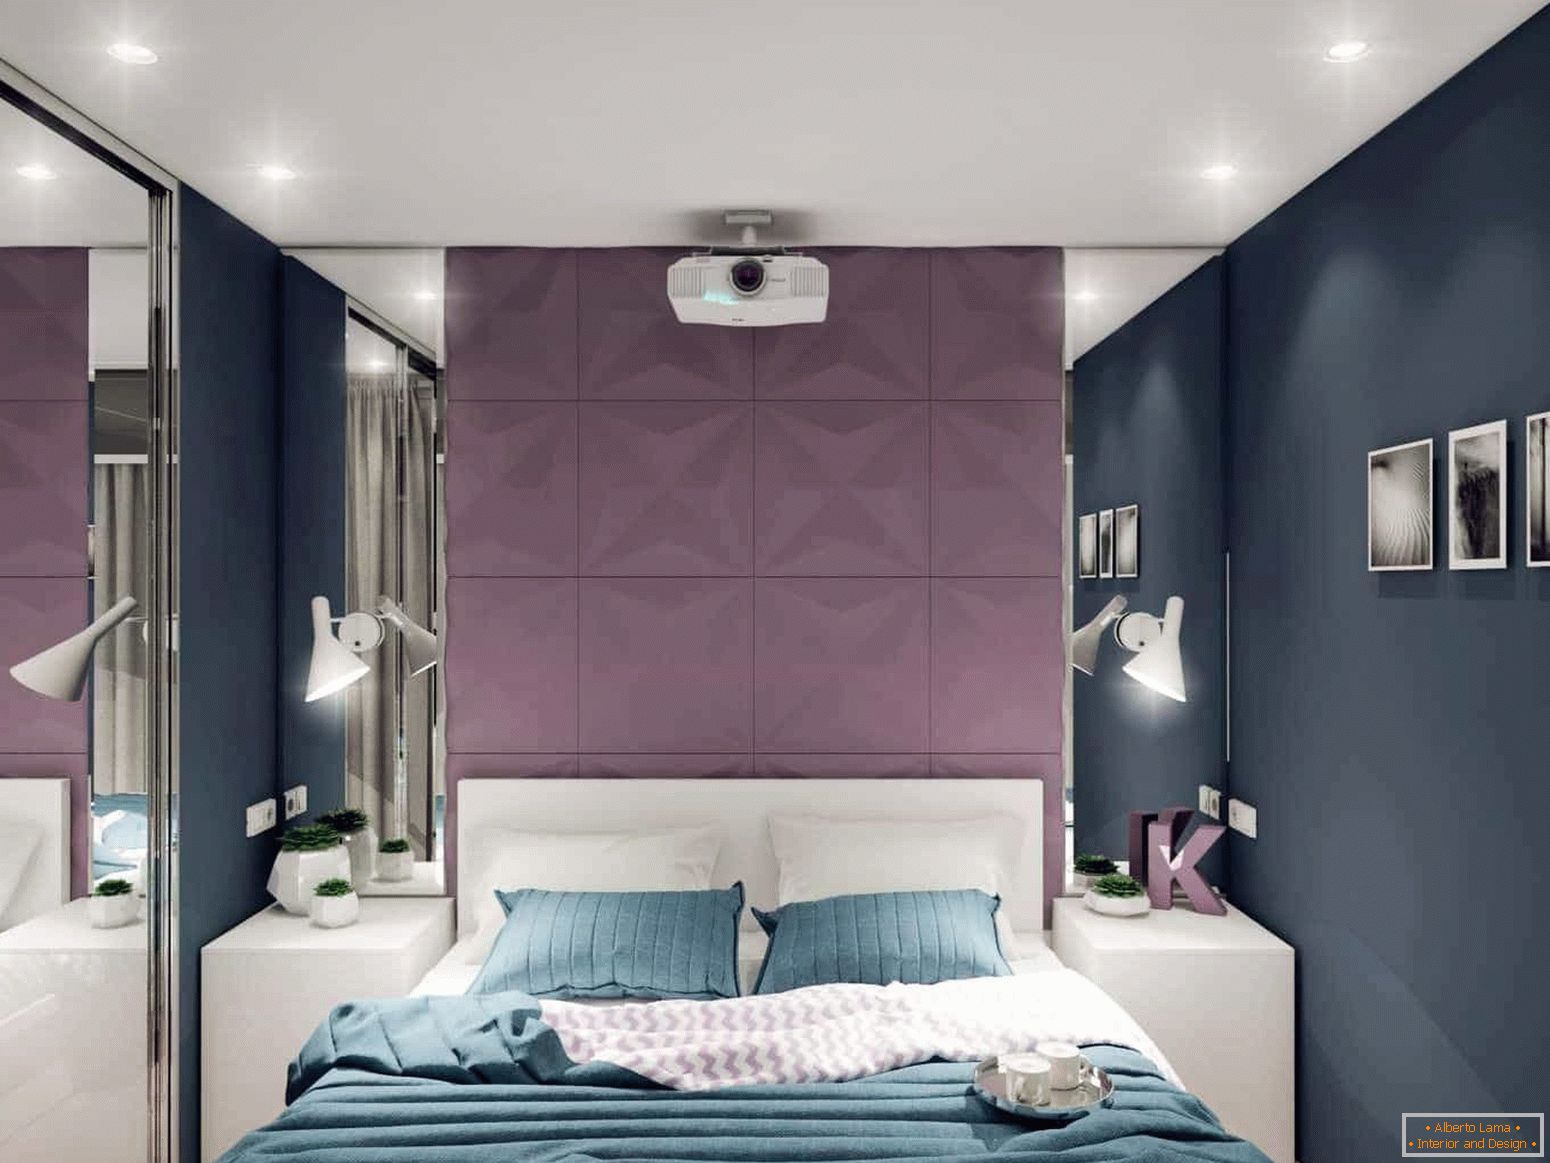 Bedroom in high-tech style